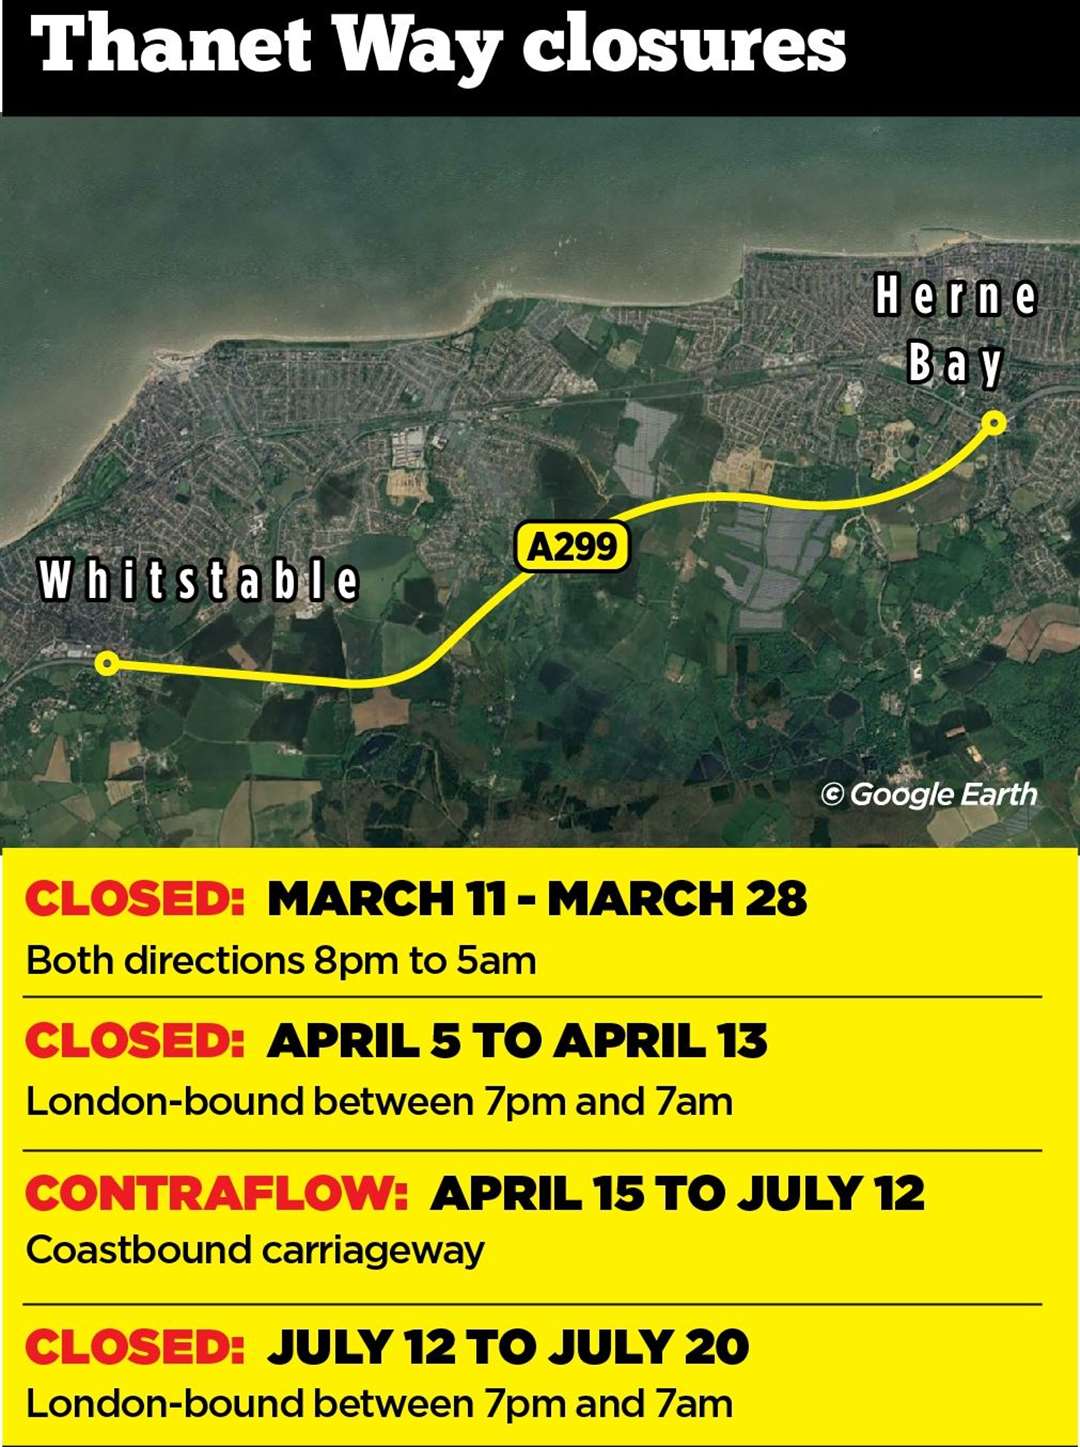 The closures are on a stretch between Whitstable and Herne Bay